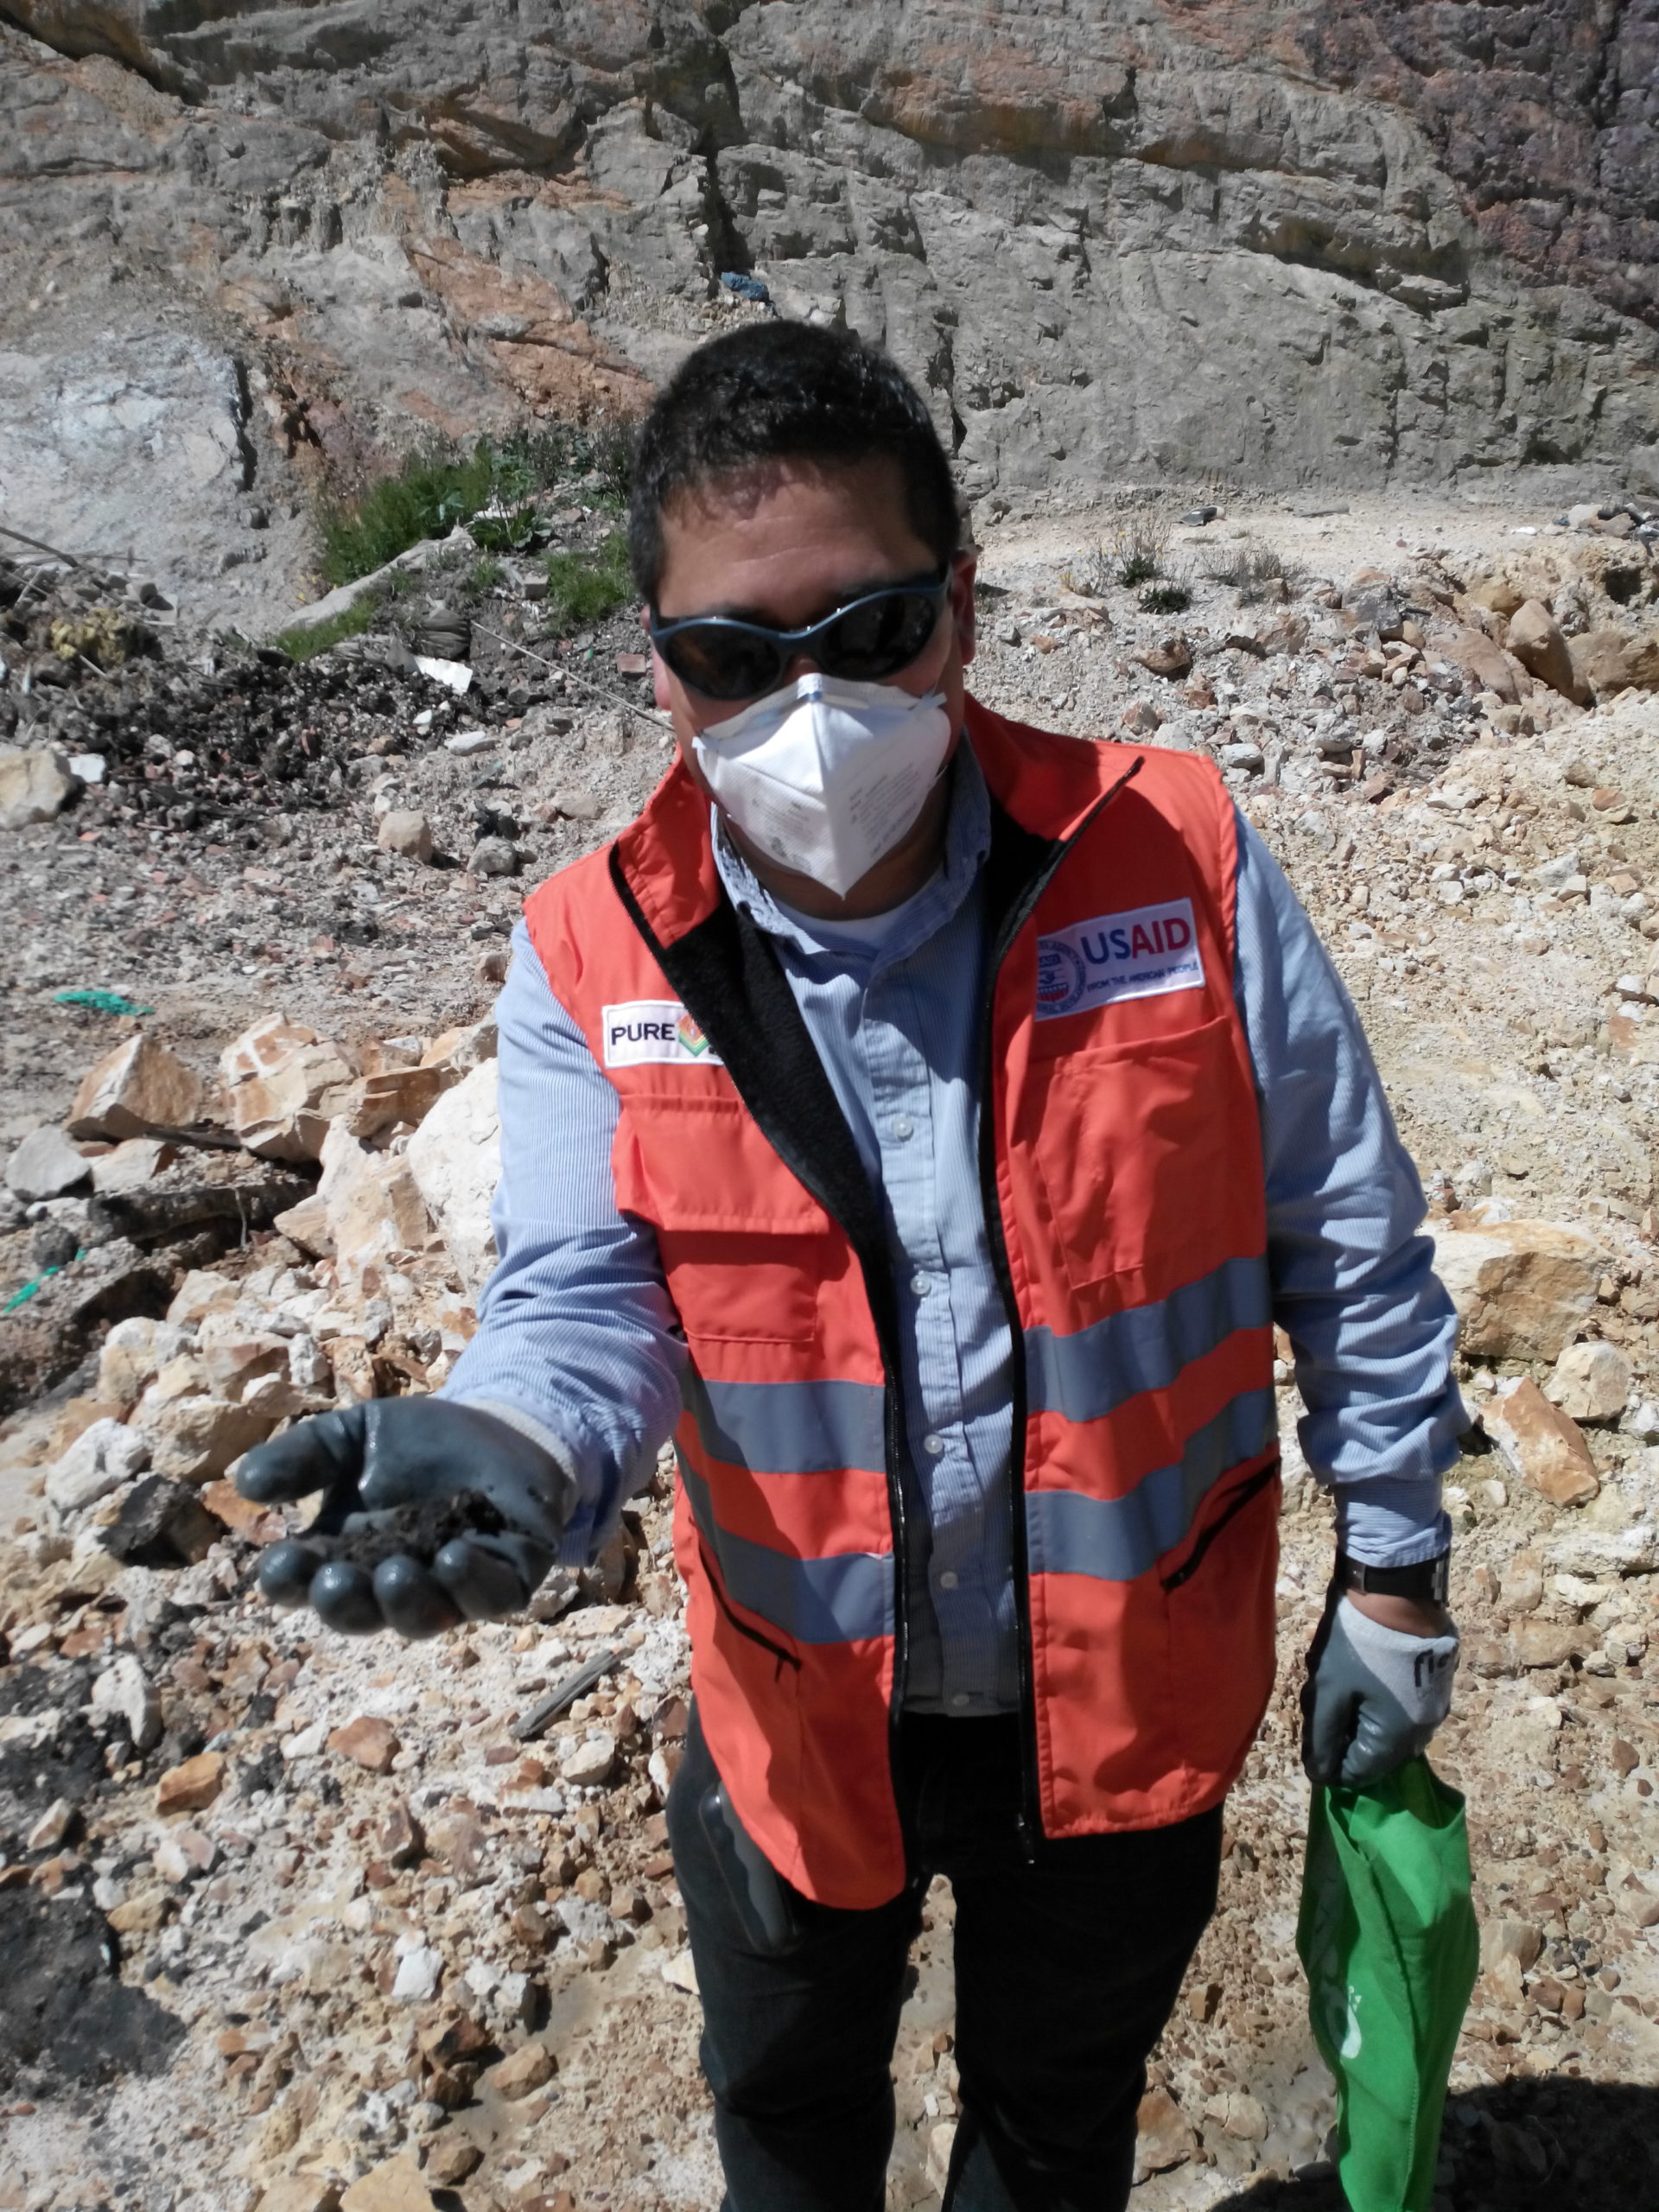 Investigating a toxic site in Colombia